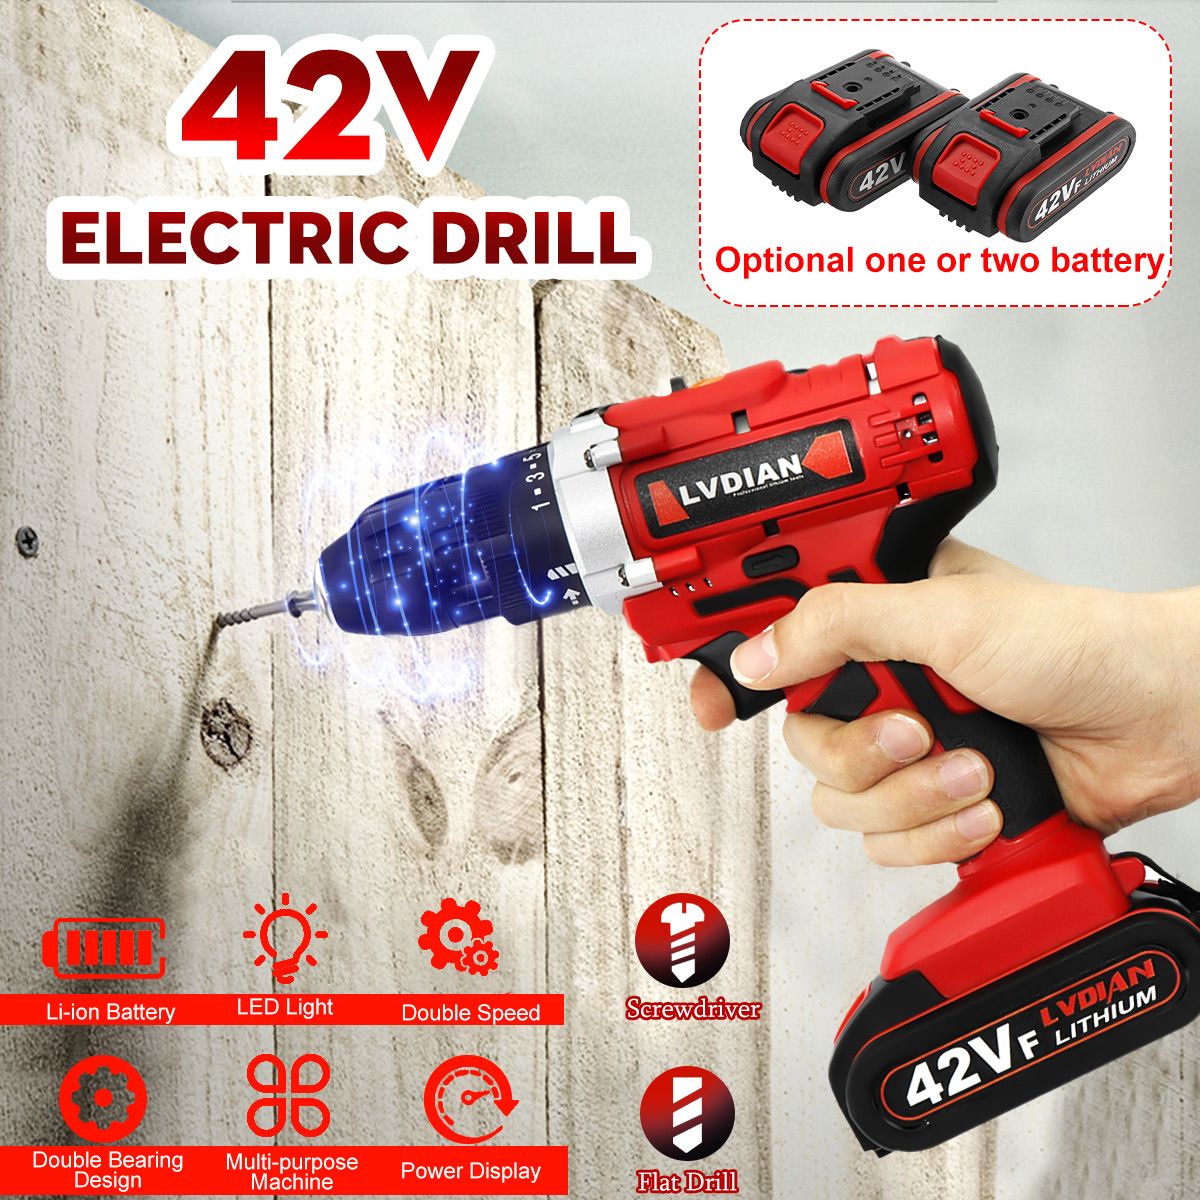 42V-Waterproof-Electric-Hand-Drill-251-Torque-Cordless-Rechargeable-Electric-Drill-Screwdriver-LED-W-1574102